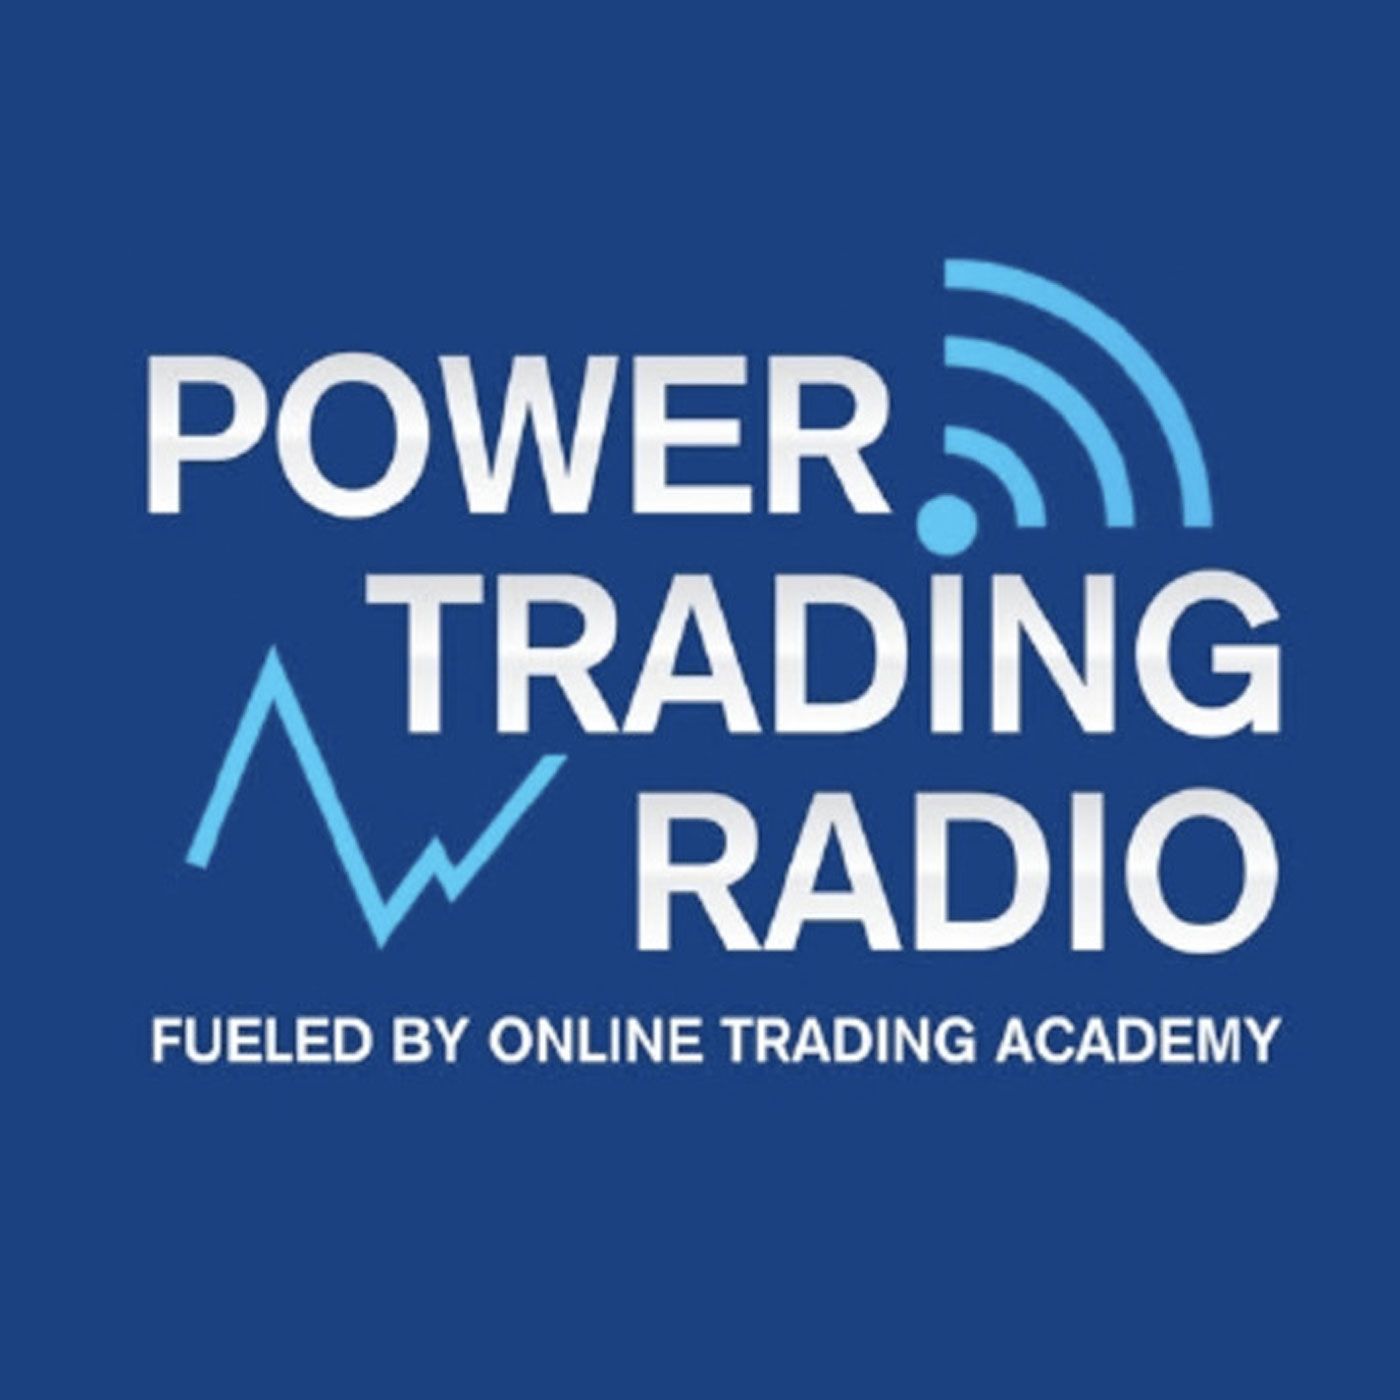 ONLINE TRADING ACADEMY 2-4-18 7PM & 11PM